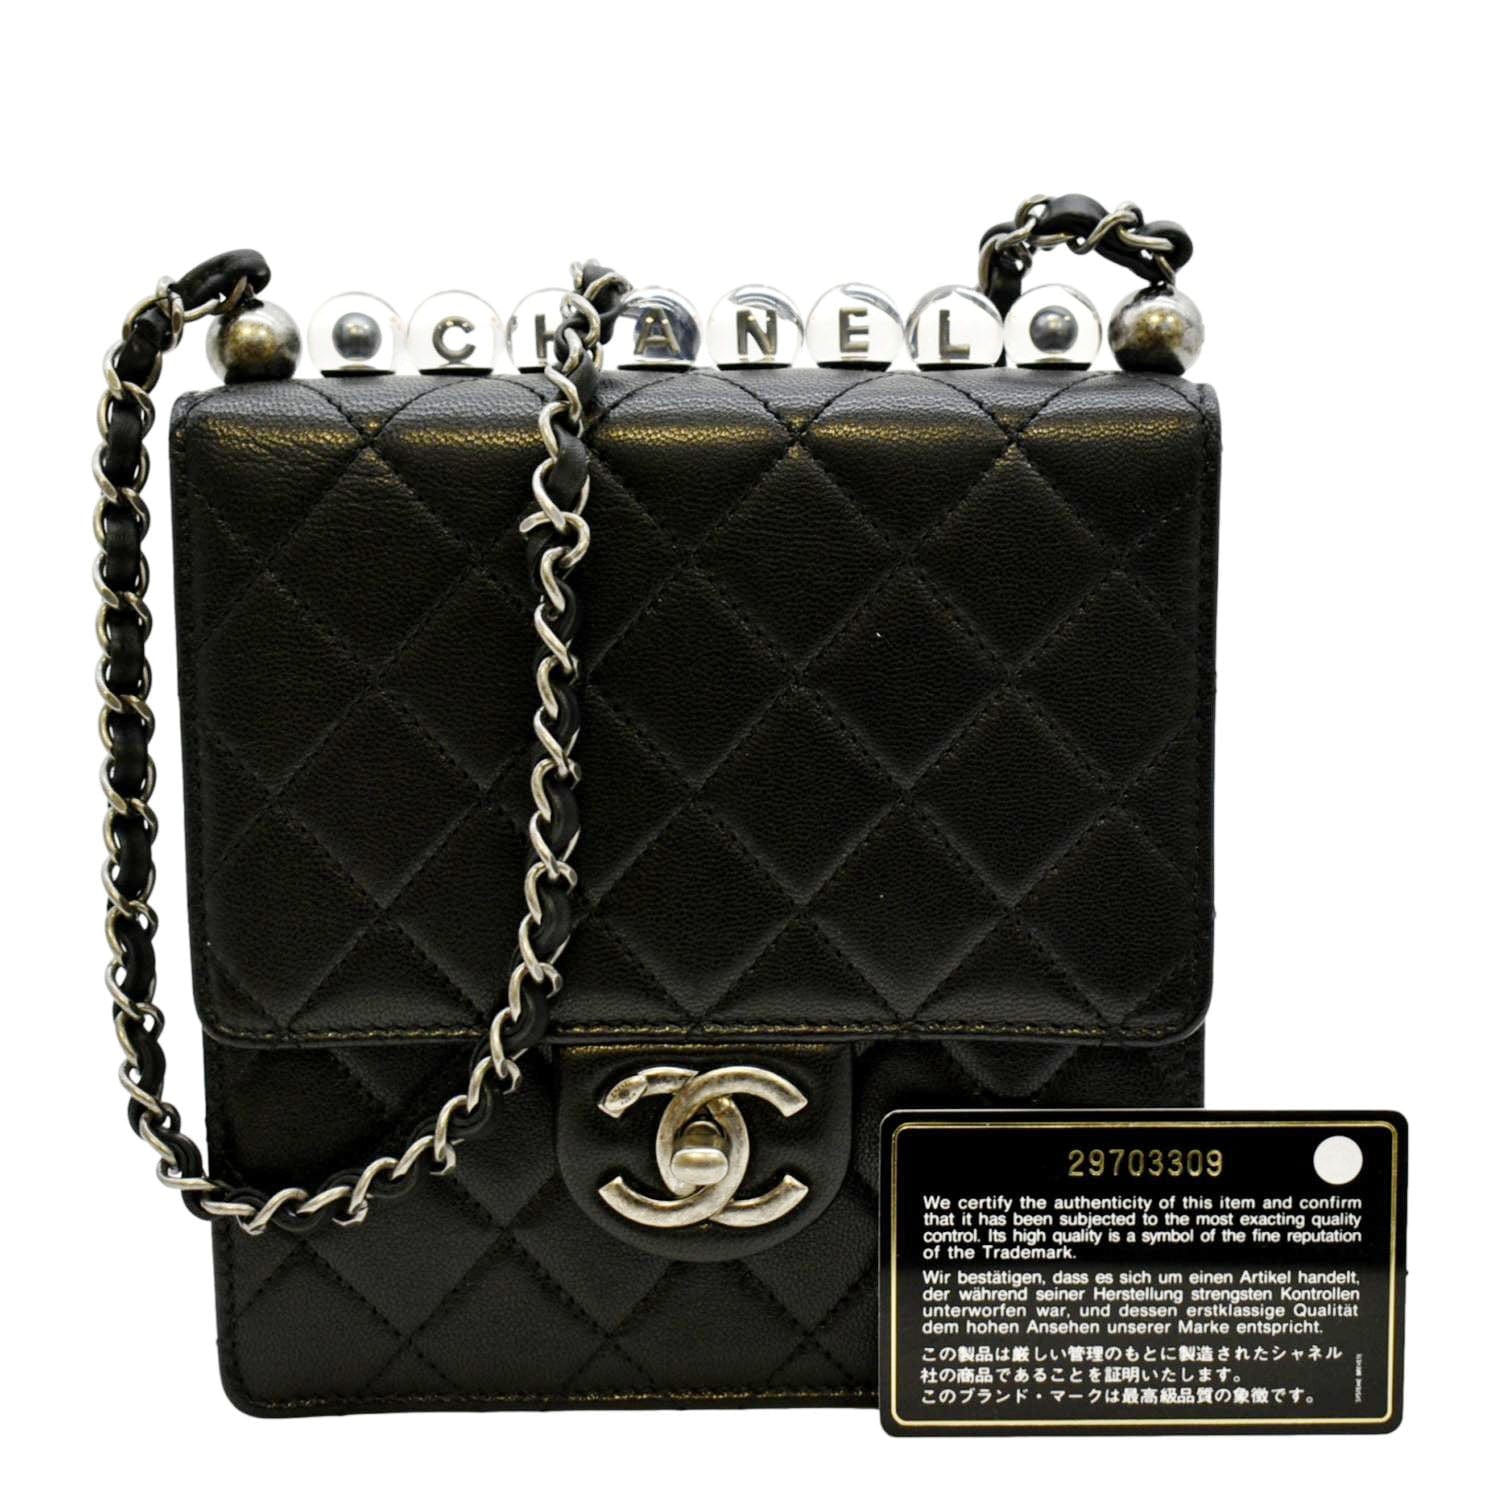 Chanel Black Chic Pearls Quilted Pearl Flap Bag – Boutique Patina